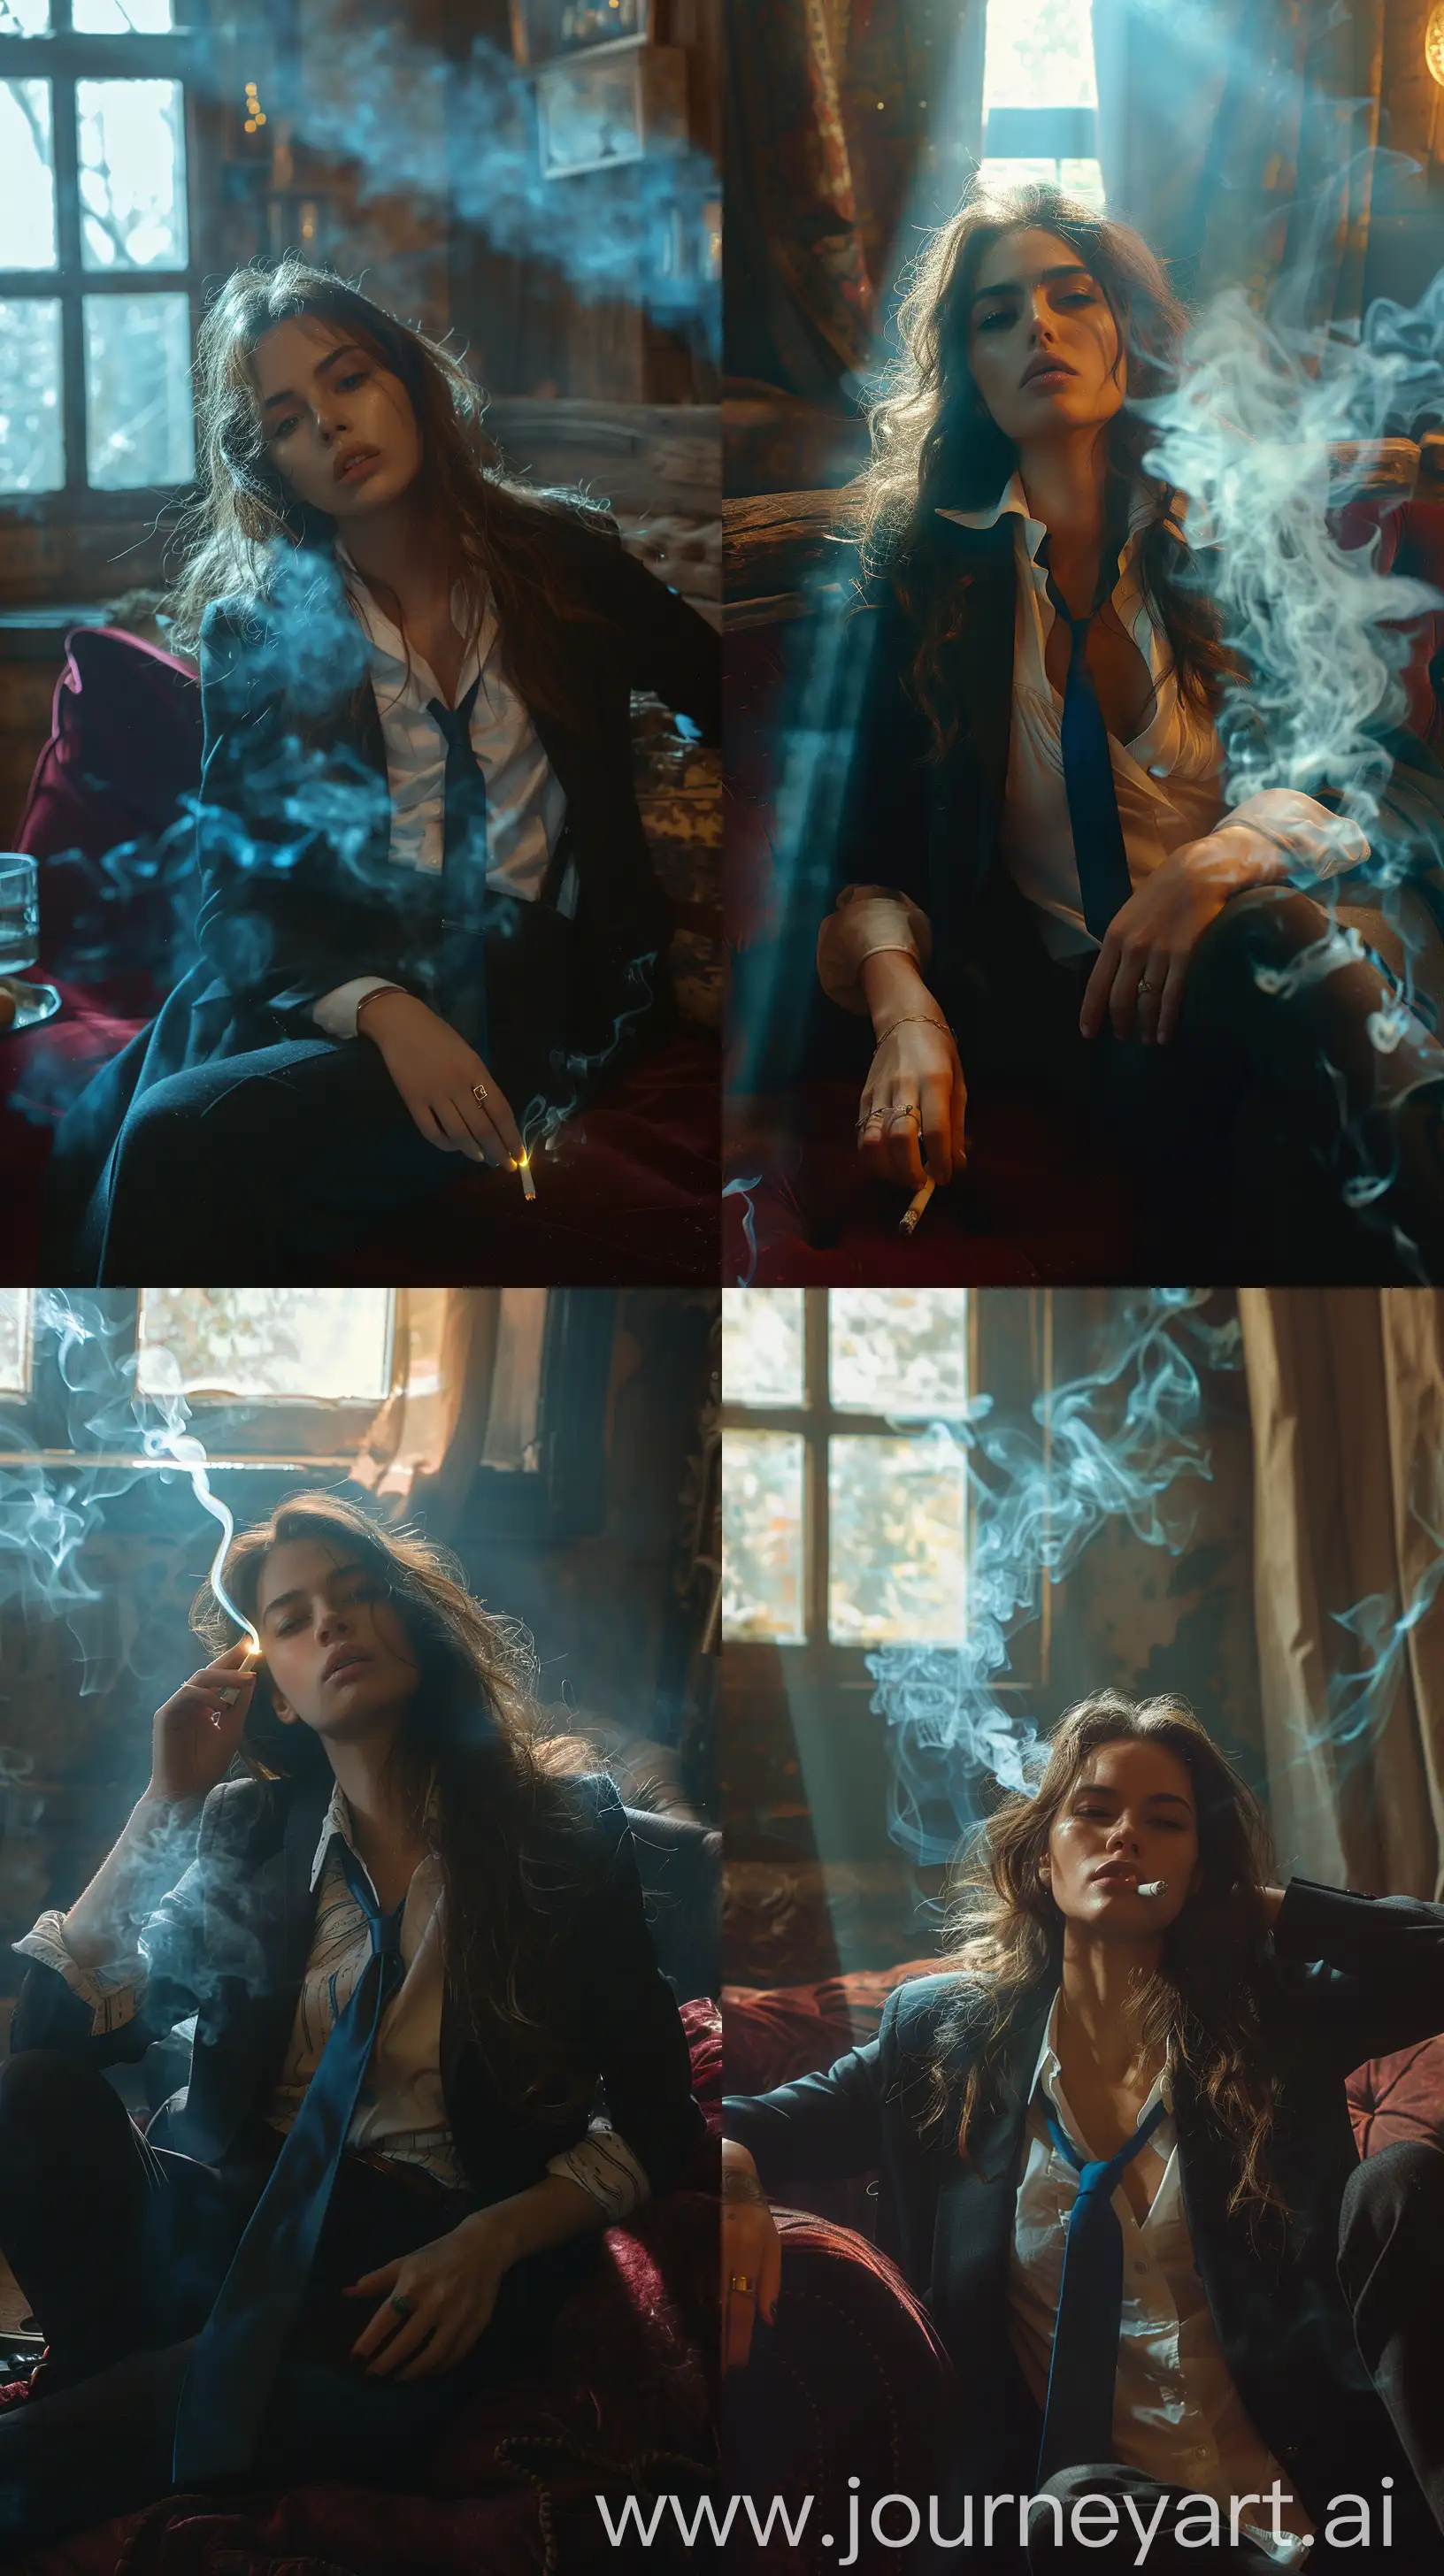 photography, dimly lit room with a hazy atmosphere, capturing a female figure lounging on a deep crimson color rustic couch, wearing a black suit and white shirt with loose blue tie, arm resting on hers bent knee, hand holds a glowing cigarette, creating a trail of hazy smoke that wafts around her, illuminated by a beam of light from an unseen source off-camera, light filters through the deep smoke, casting dynamic patterns and giving the scene a moody, dark atmosphere, cinematic quality resolution, air of contemplation in hers posture and the ambient glow contributes to the intimate and introspective mood of the portrait, high contrast --ar 9:16 --style raw --s 400